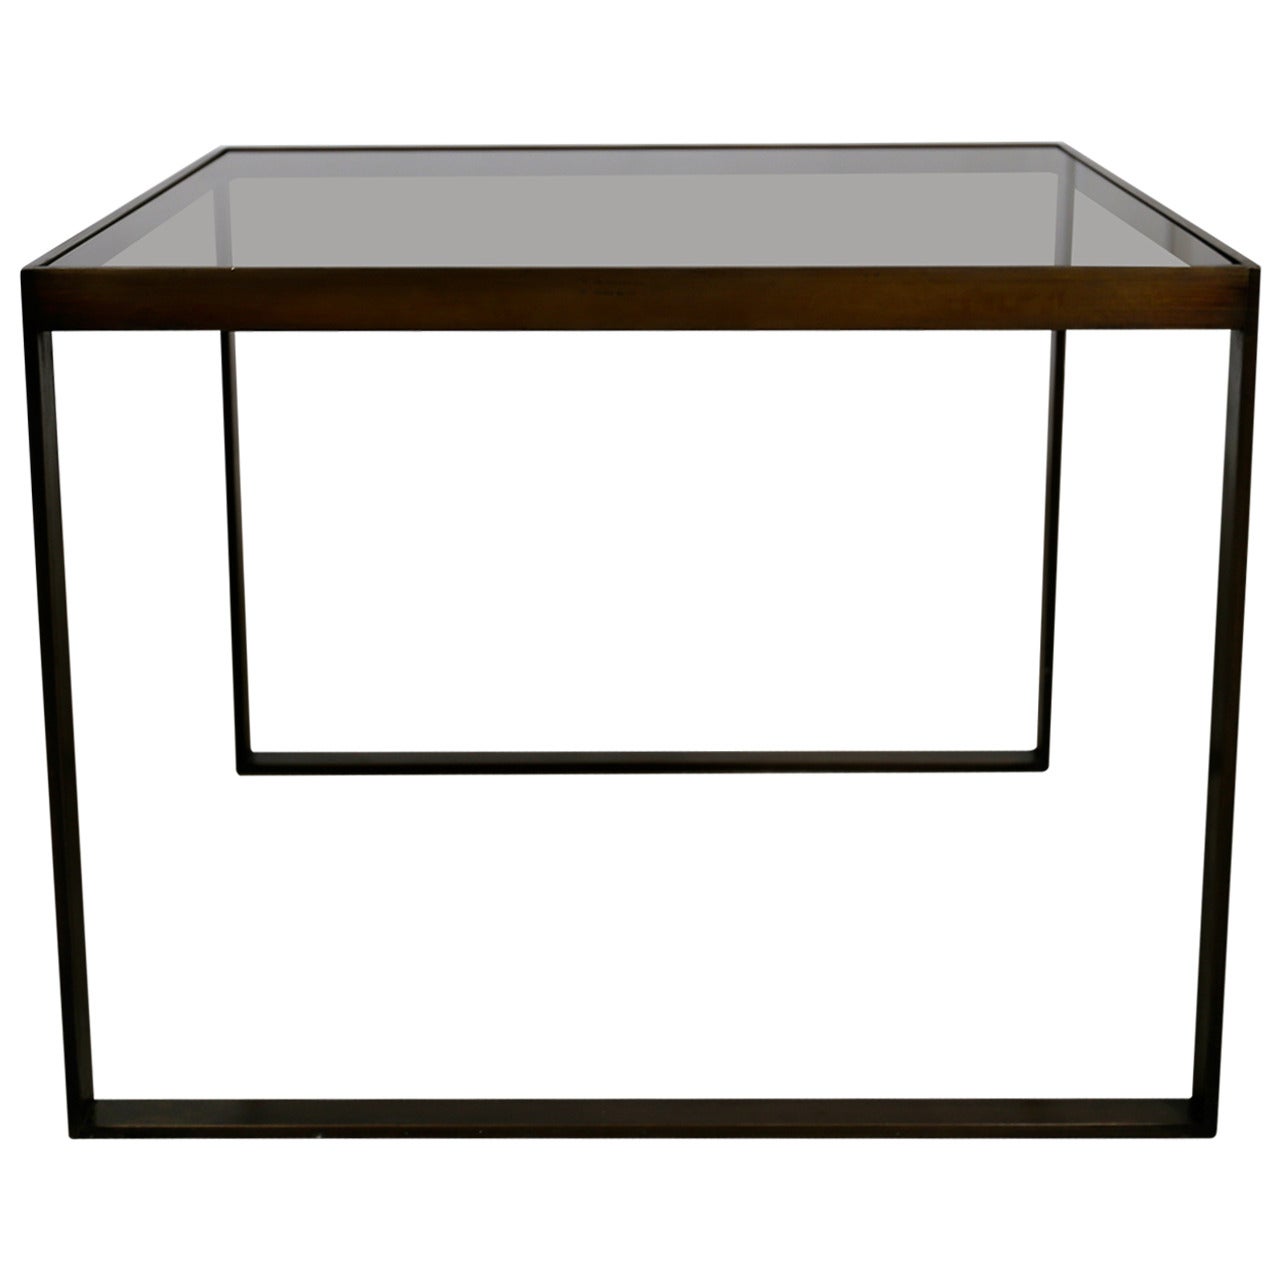 Bronze and Smoked Glass Side Table by Edward Wormley for Dunbar